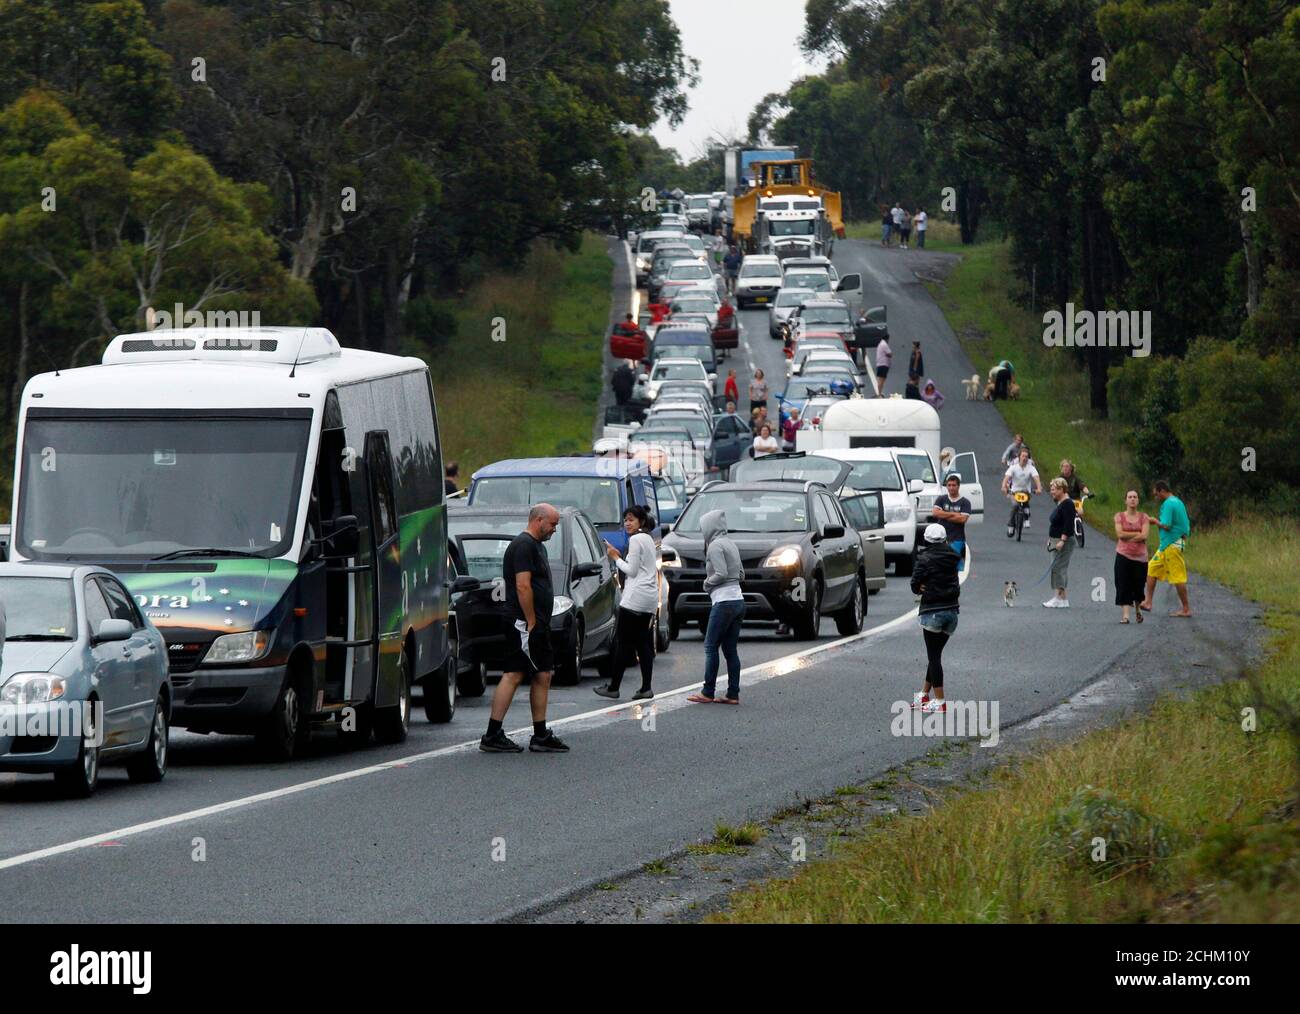 Motorists walk around their stationary cars while caught in a major traffic jam caused by a truck accident on the Hume Highway near Goulburn, March 7, 2010. The state road and traffic authority reported that the accident caused a 25 km (15 miles) long traffic jam.       REUTERS/Tim Wimborne   (AUSTRALIA - Tags: DISASTER TRANSPORT SOCIETY) Stock Photo